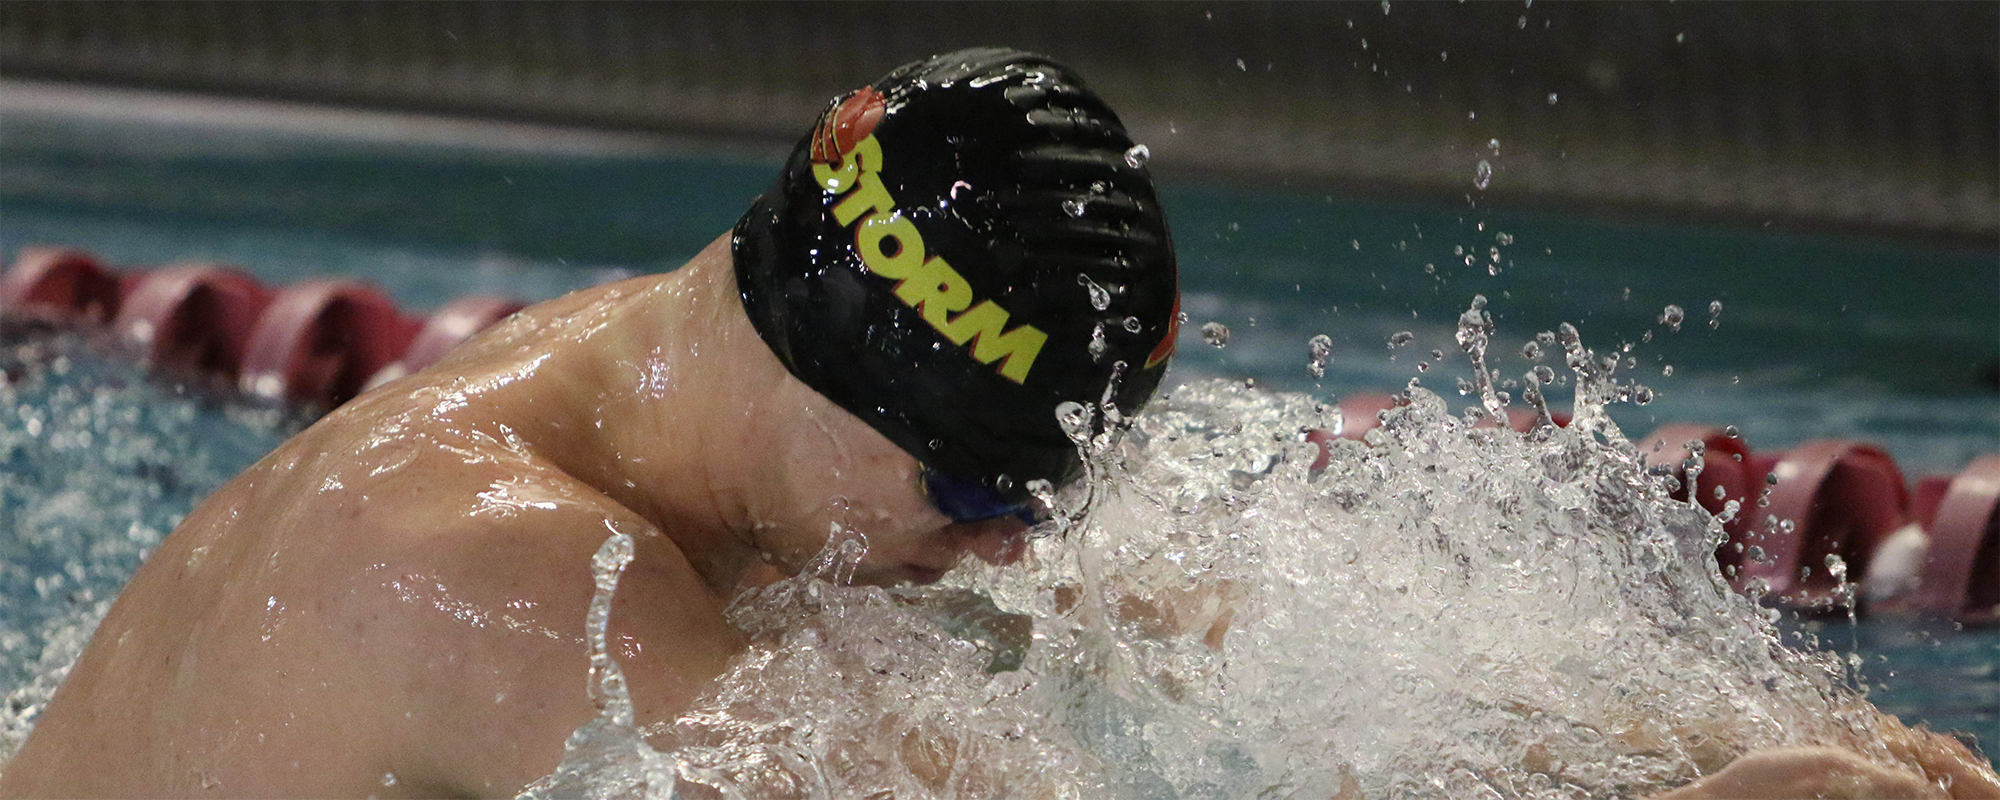 Storm conclude day two of Liberal Arts Championships